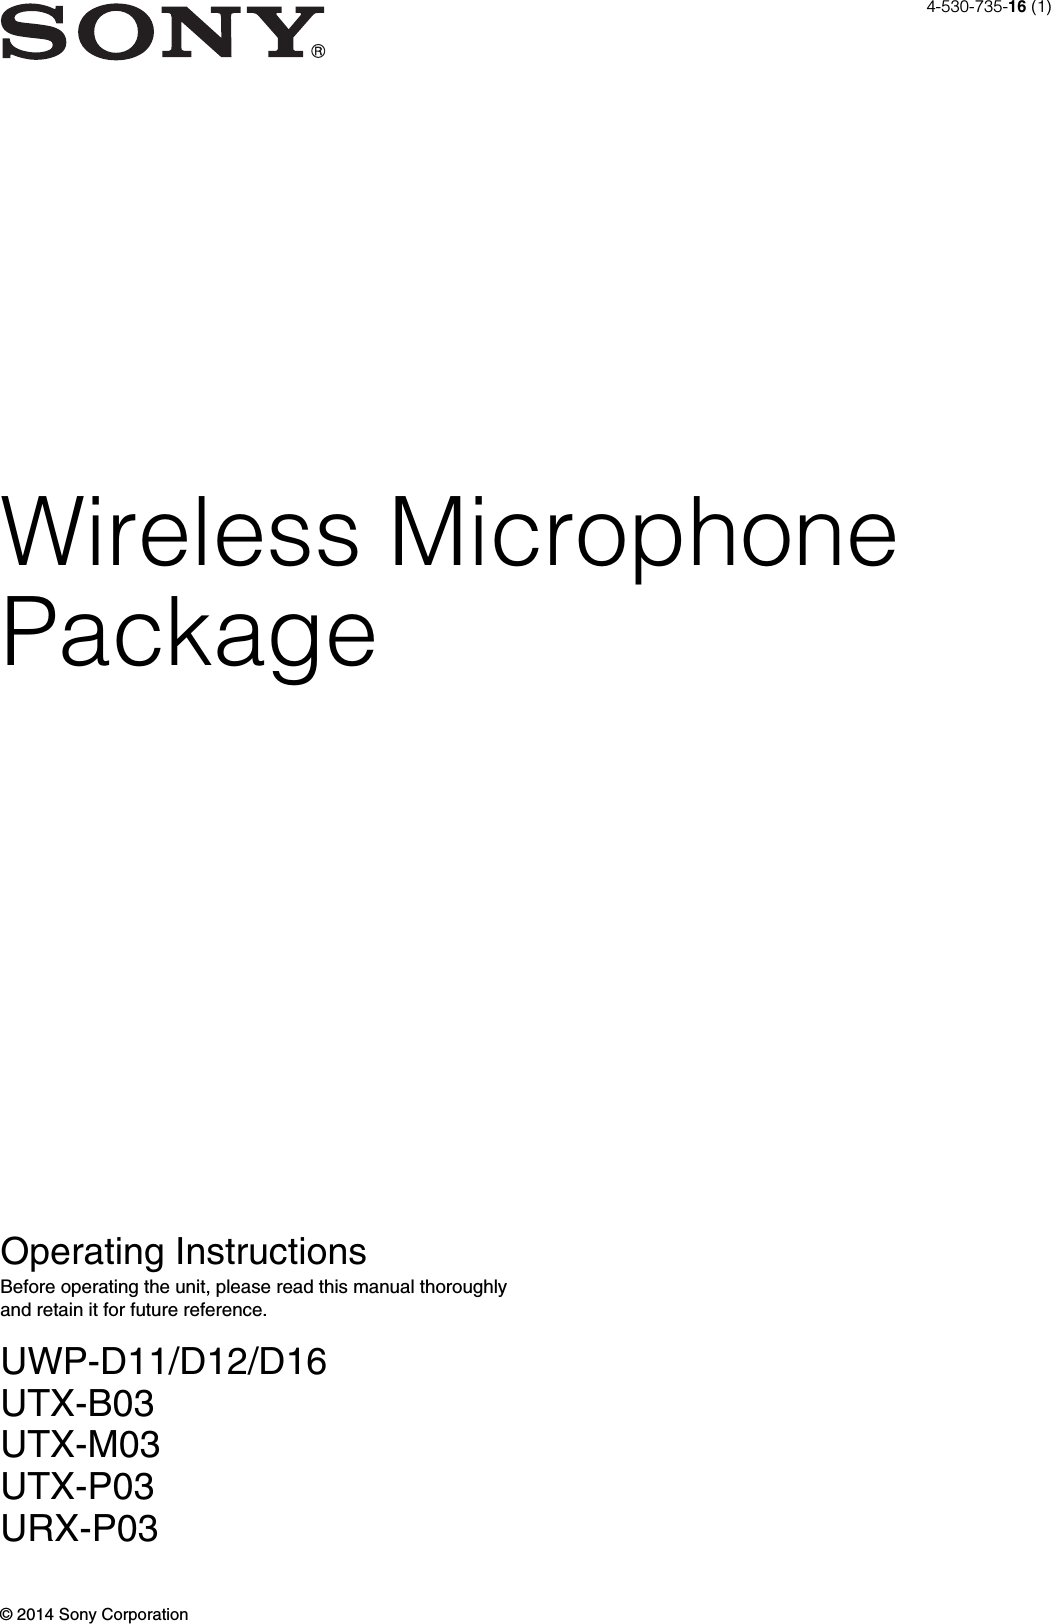 Wireless MicrophonePackageOperating InstructionsBefore operating the unit, please read this manual thoroughly and retain it for future reference.UWP-D11/D12/D16UTX-B03UTX-M03UTX-P03URX-P034-530-735-16 (1)© 2014 Sony Corporation